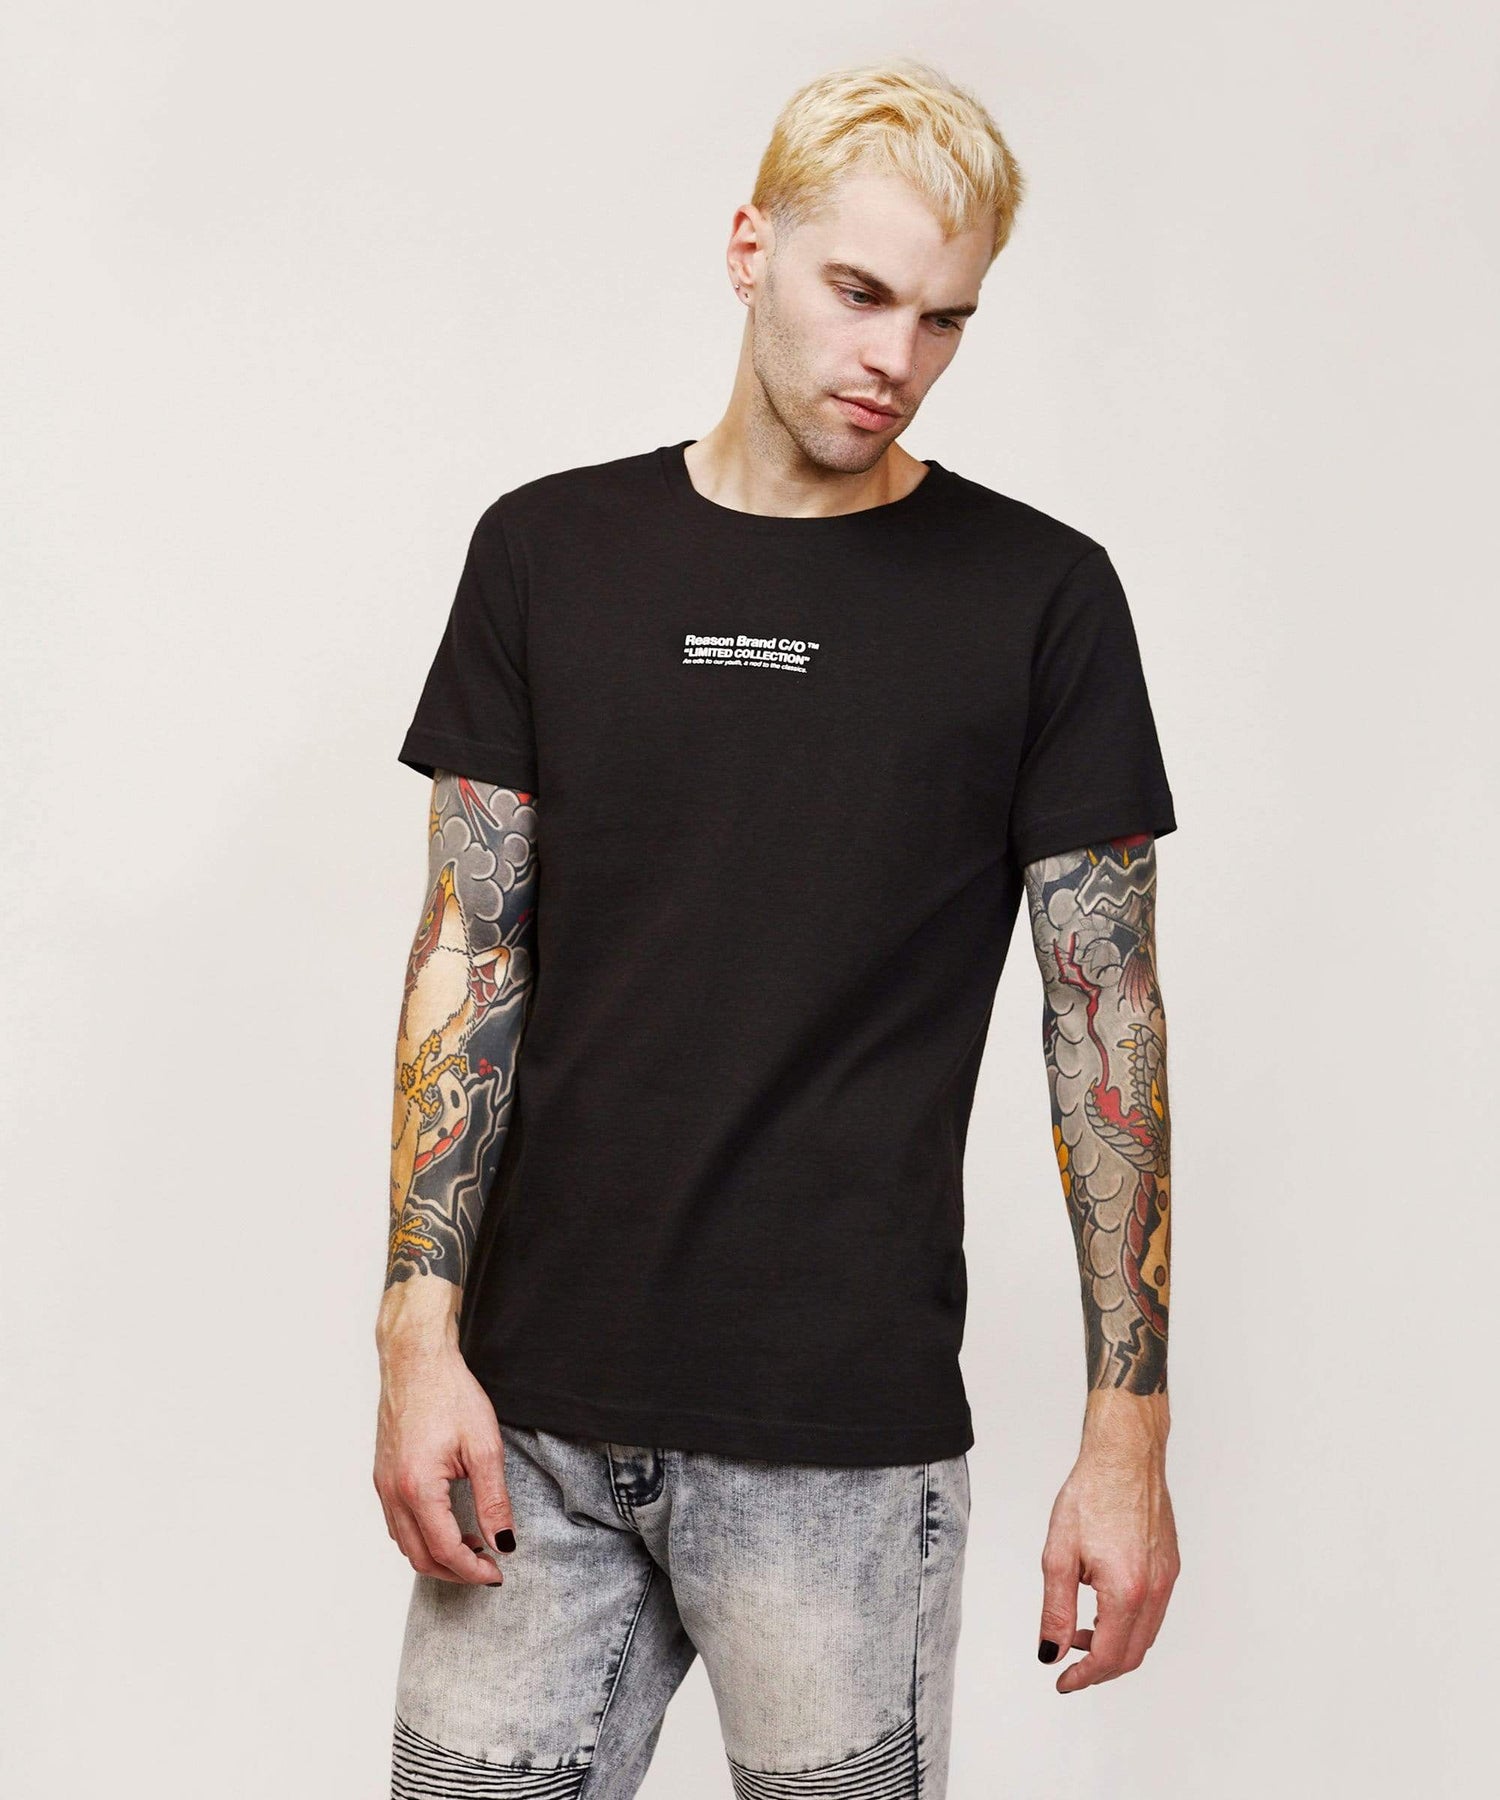 Reason Clothing | Shop The Latest Sale Styles